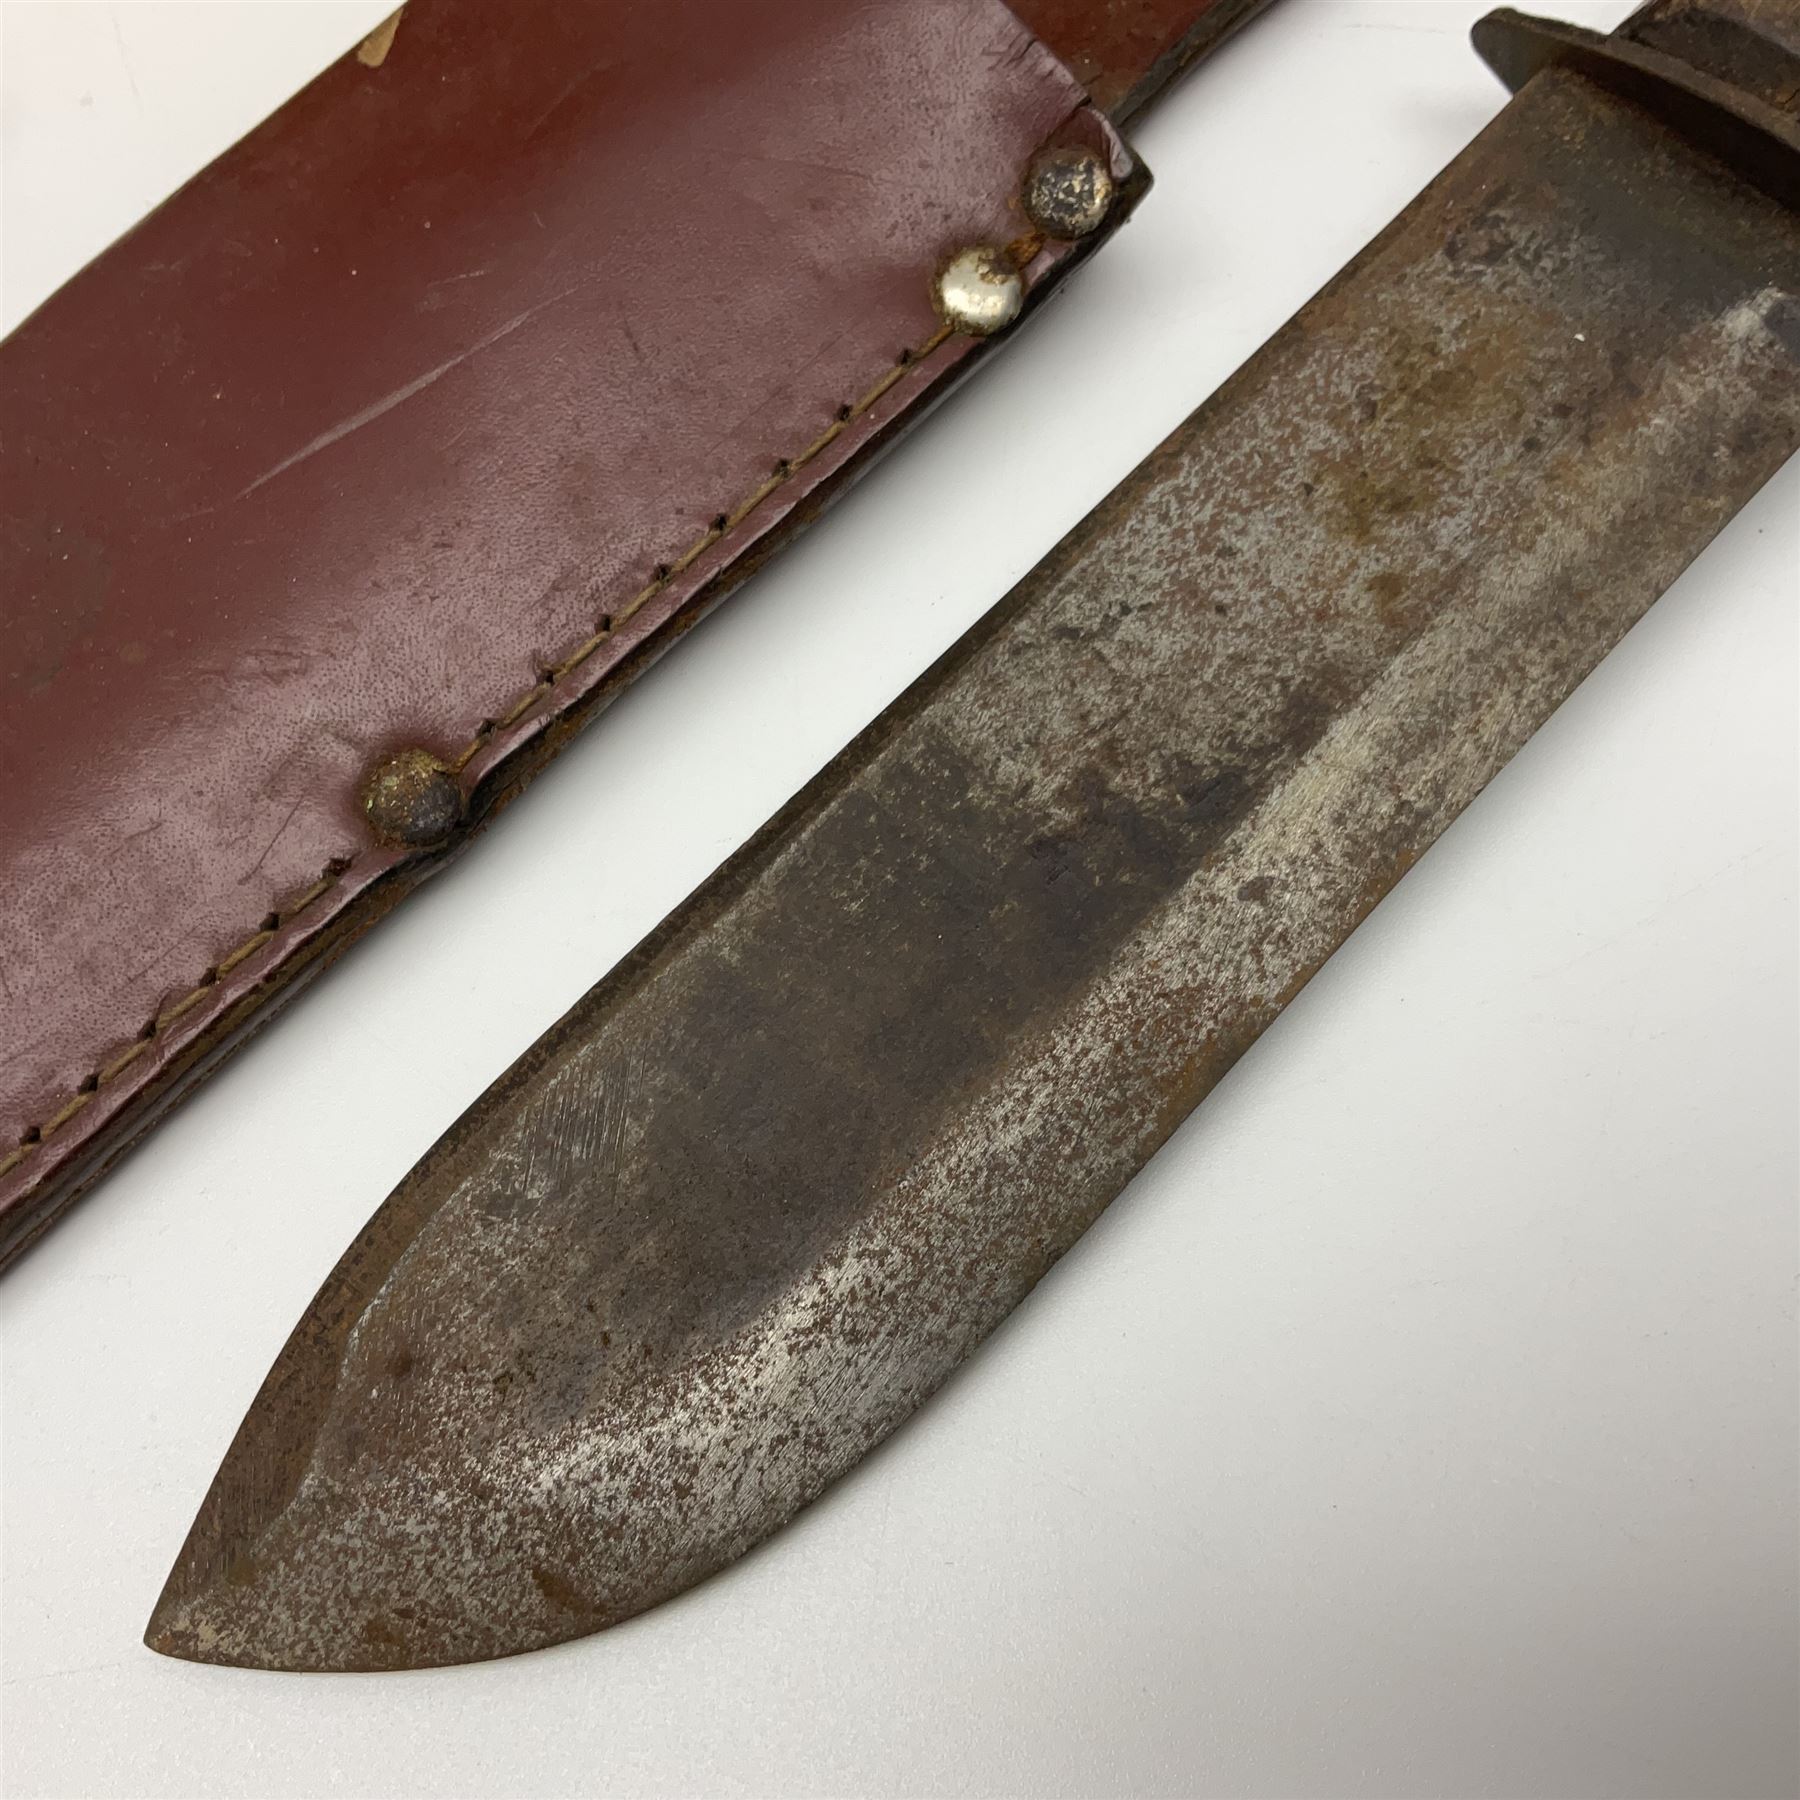 1960s survival knife the 18cm (7") single edged steel blade stamped with the Navy store code 0274/45 - Image 5 of 18